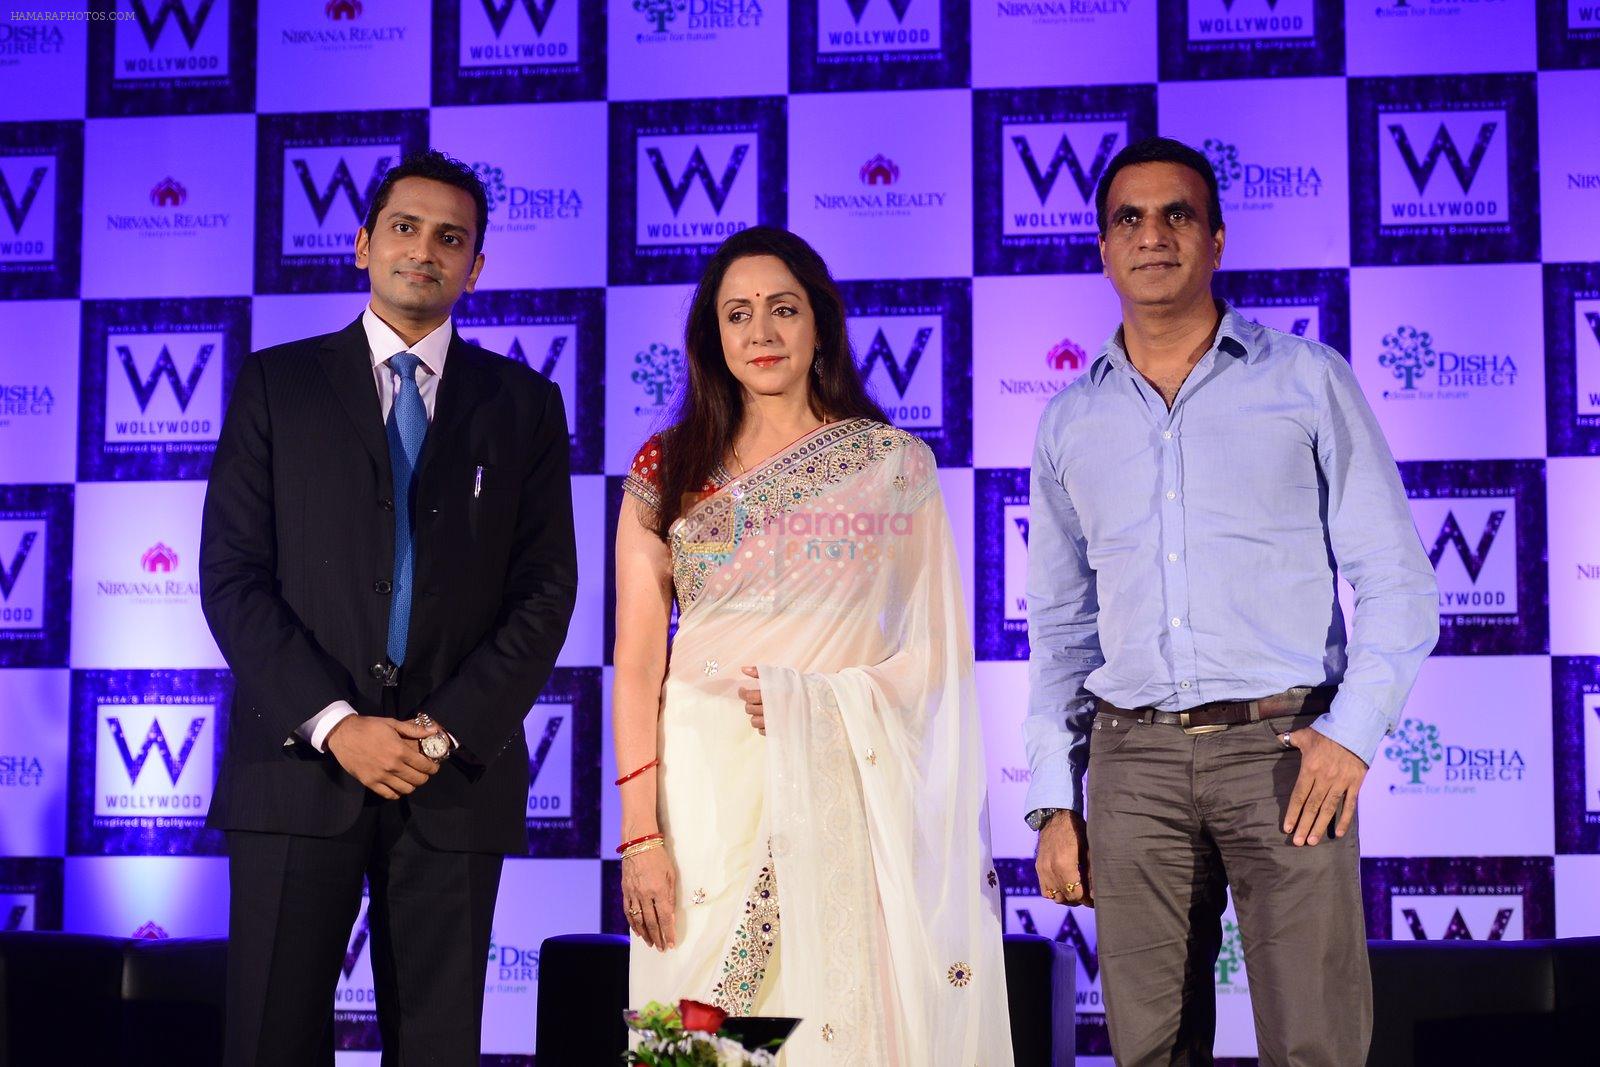 Hema Malini at the launch of Wollywood, Wada's first integrated Bollywood inspired township in Mumbai on 11th Nov 2014